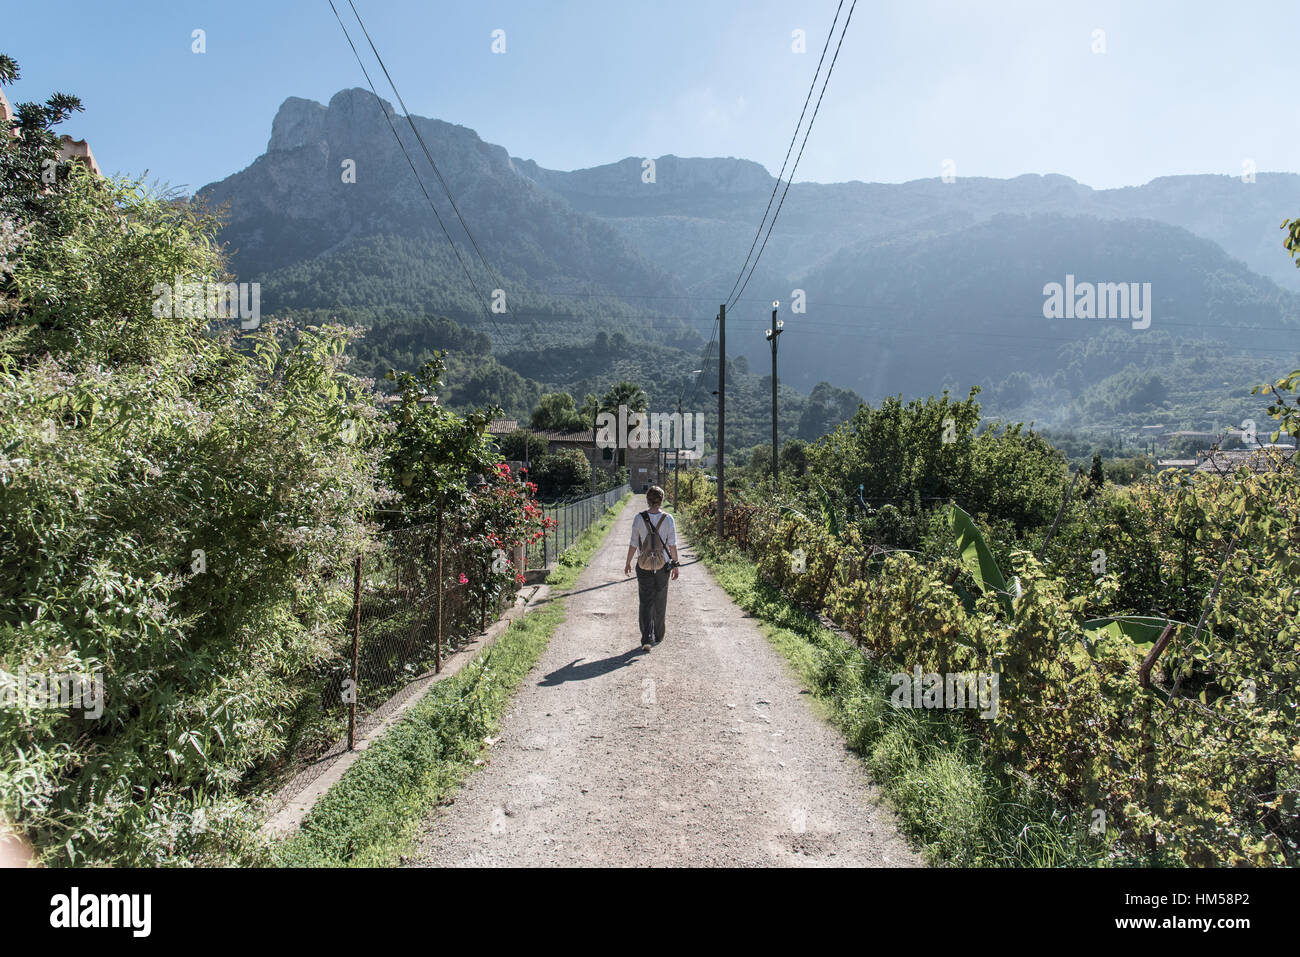 female person with backpack walking along straight narrow road through green vegetation with mountains in background near Soller, Majorca Stock Photo